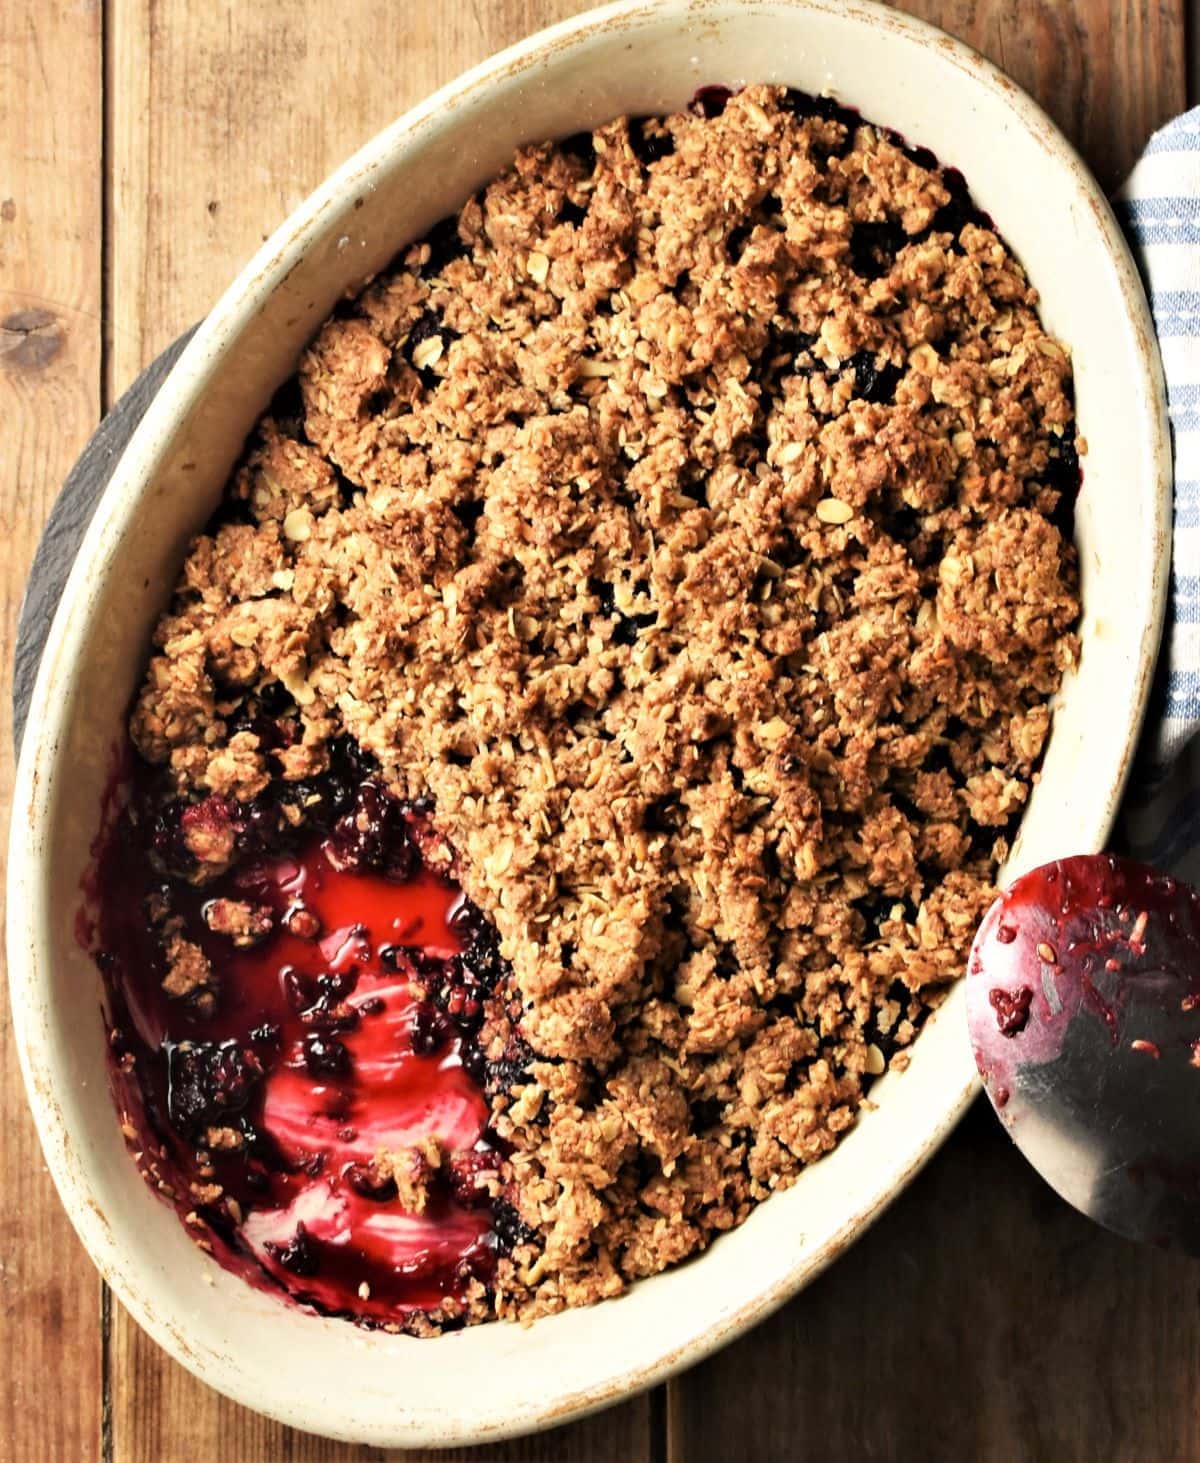 Top down view of blackberry crumble in white oval dish with spoon.